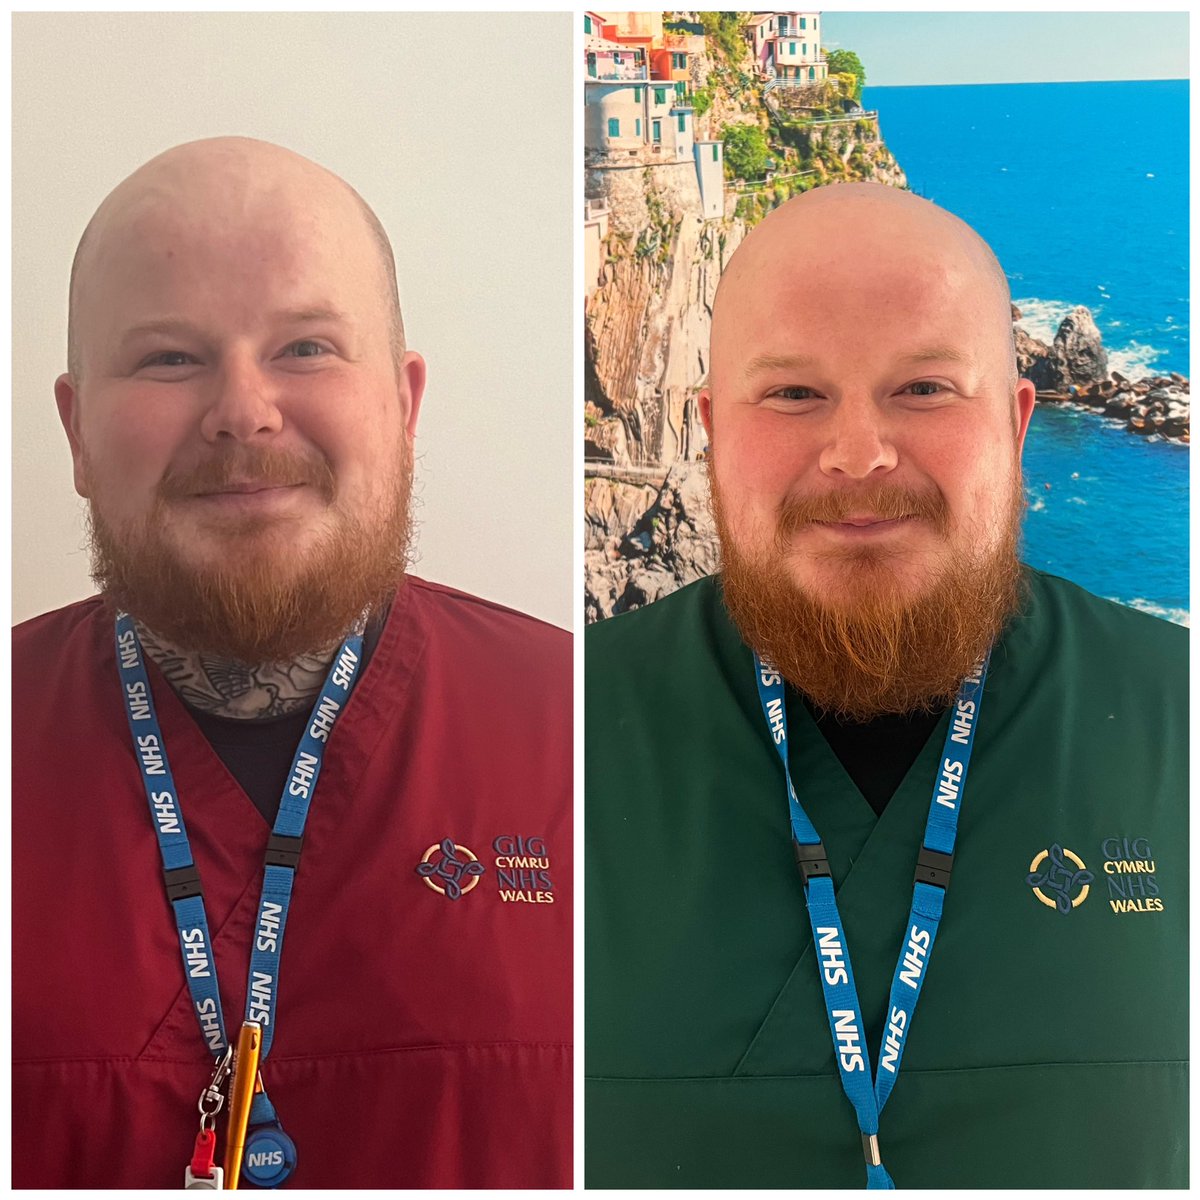 Our Ward Domestic Lloyd is now a Health Care Support Worker 👏👏 … We’re thrilled to have you on board in a different capacity! Welcome to the backbone of the team - the HCSWs … You go this 💪
#PICU #HCSW #Domestic #transition #ABUHB #Nursing #safewards #change